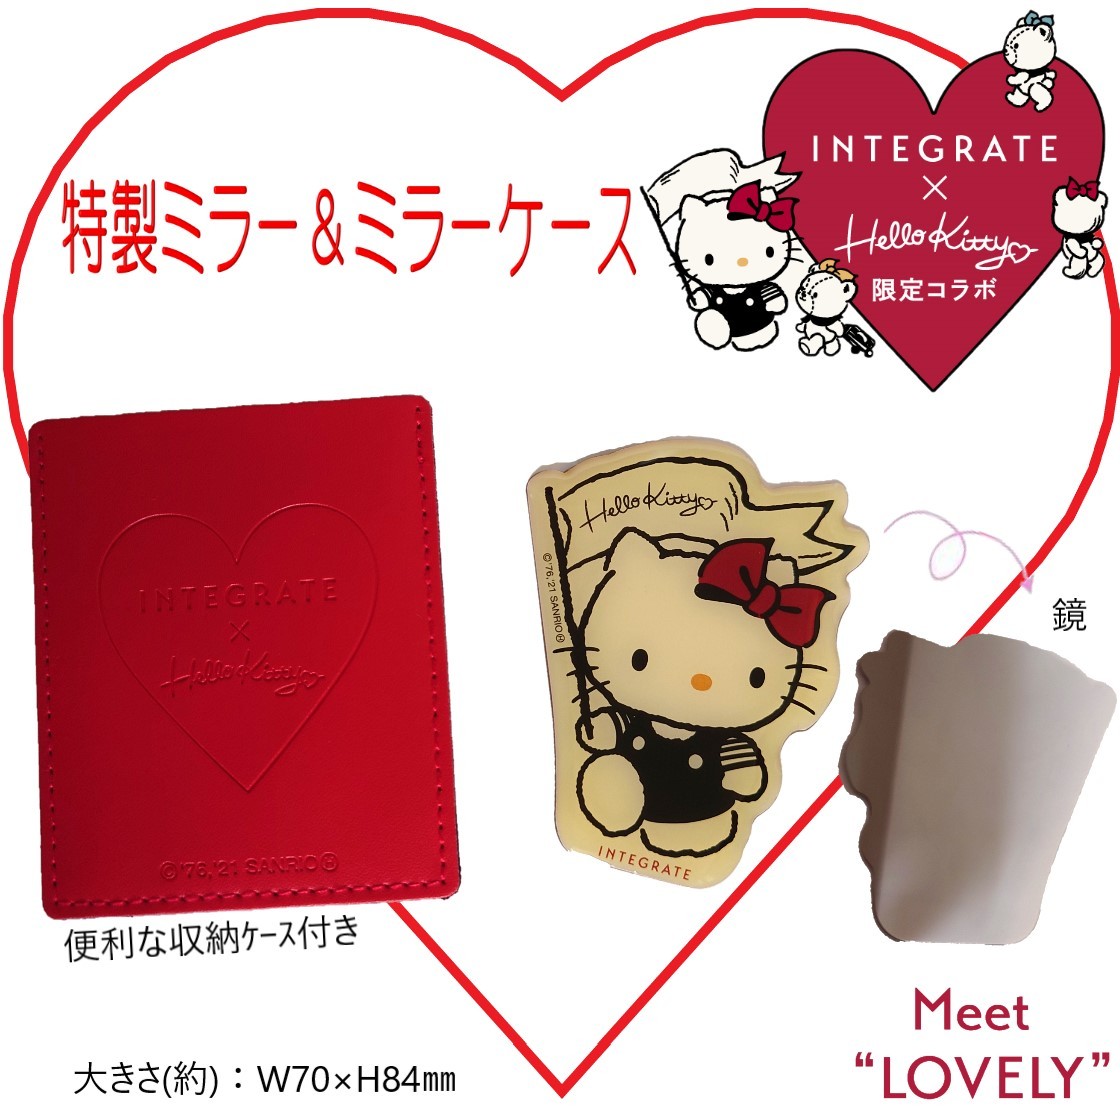  Hello Kitty -/ Special made mirror & mirror case [ Hello Kitty -× Integrate limitation collaboration ] postage 90 jpy 